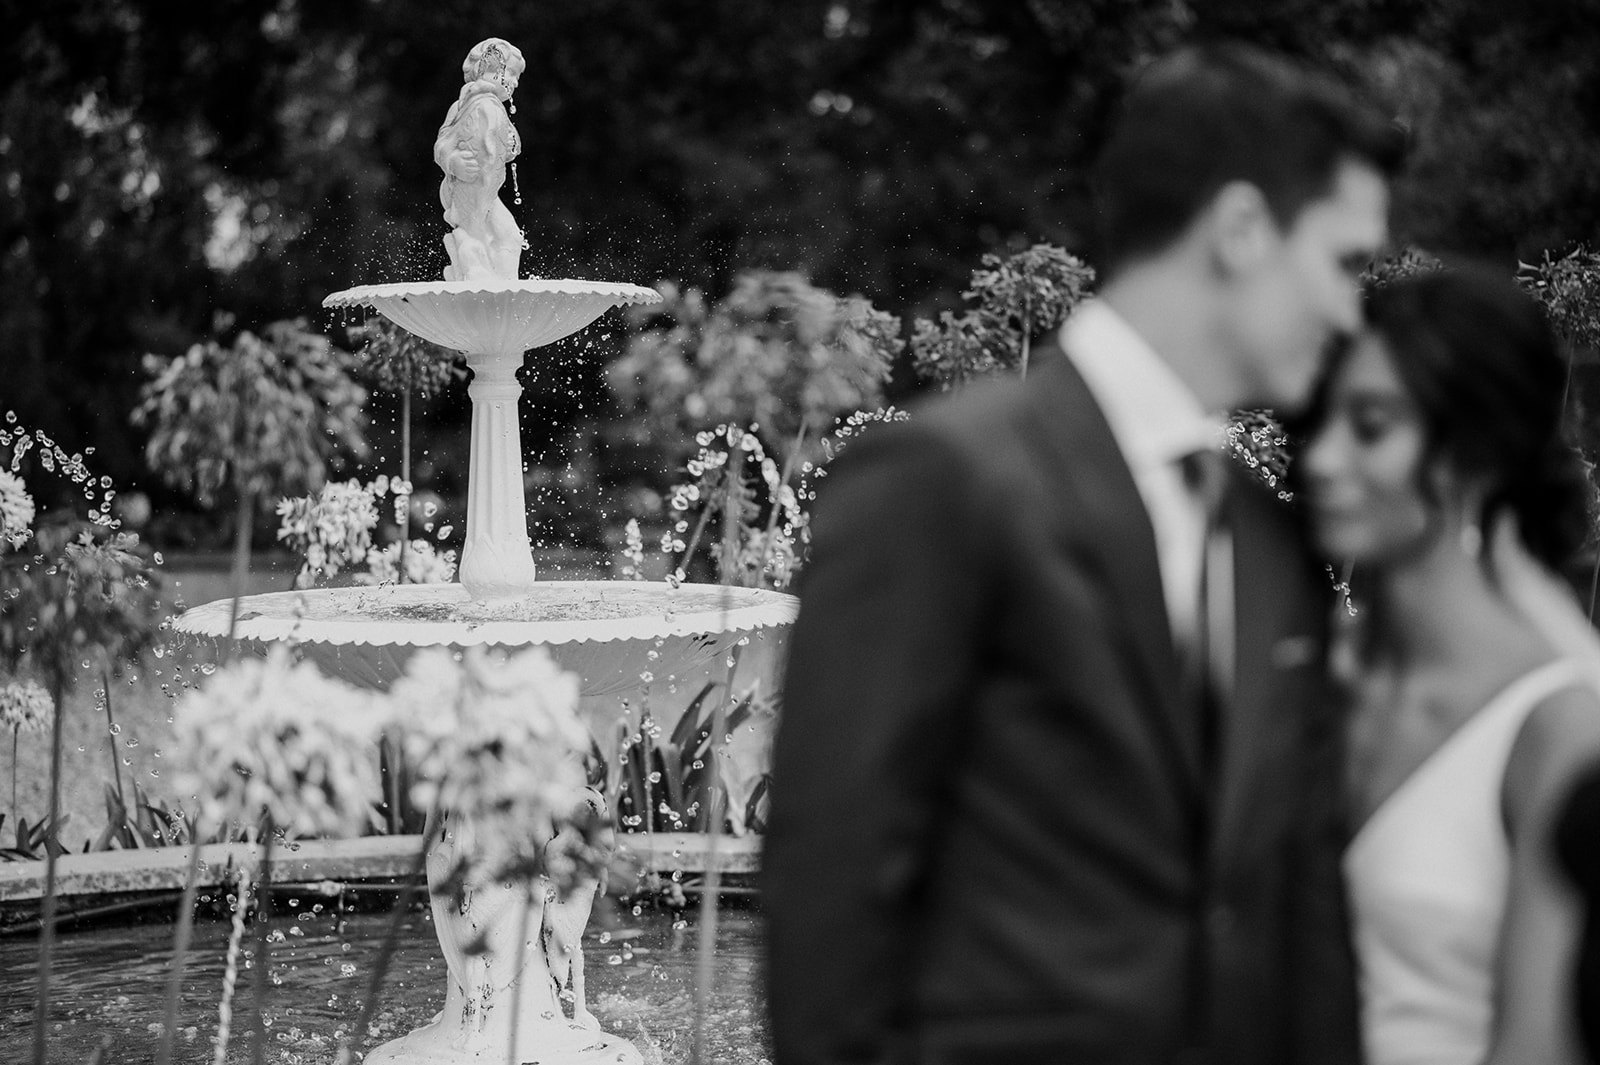 Bride and groom with fountain in background